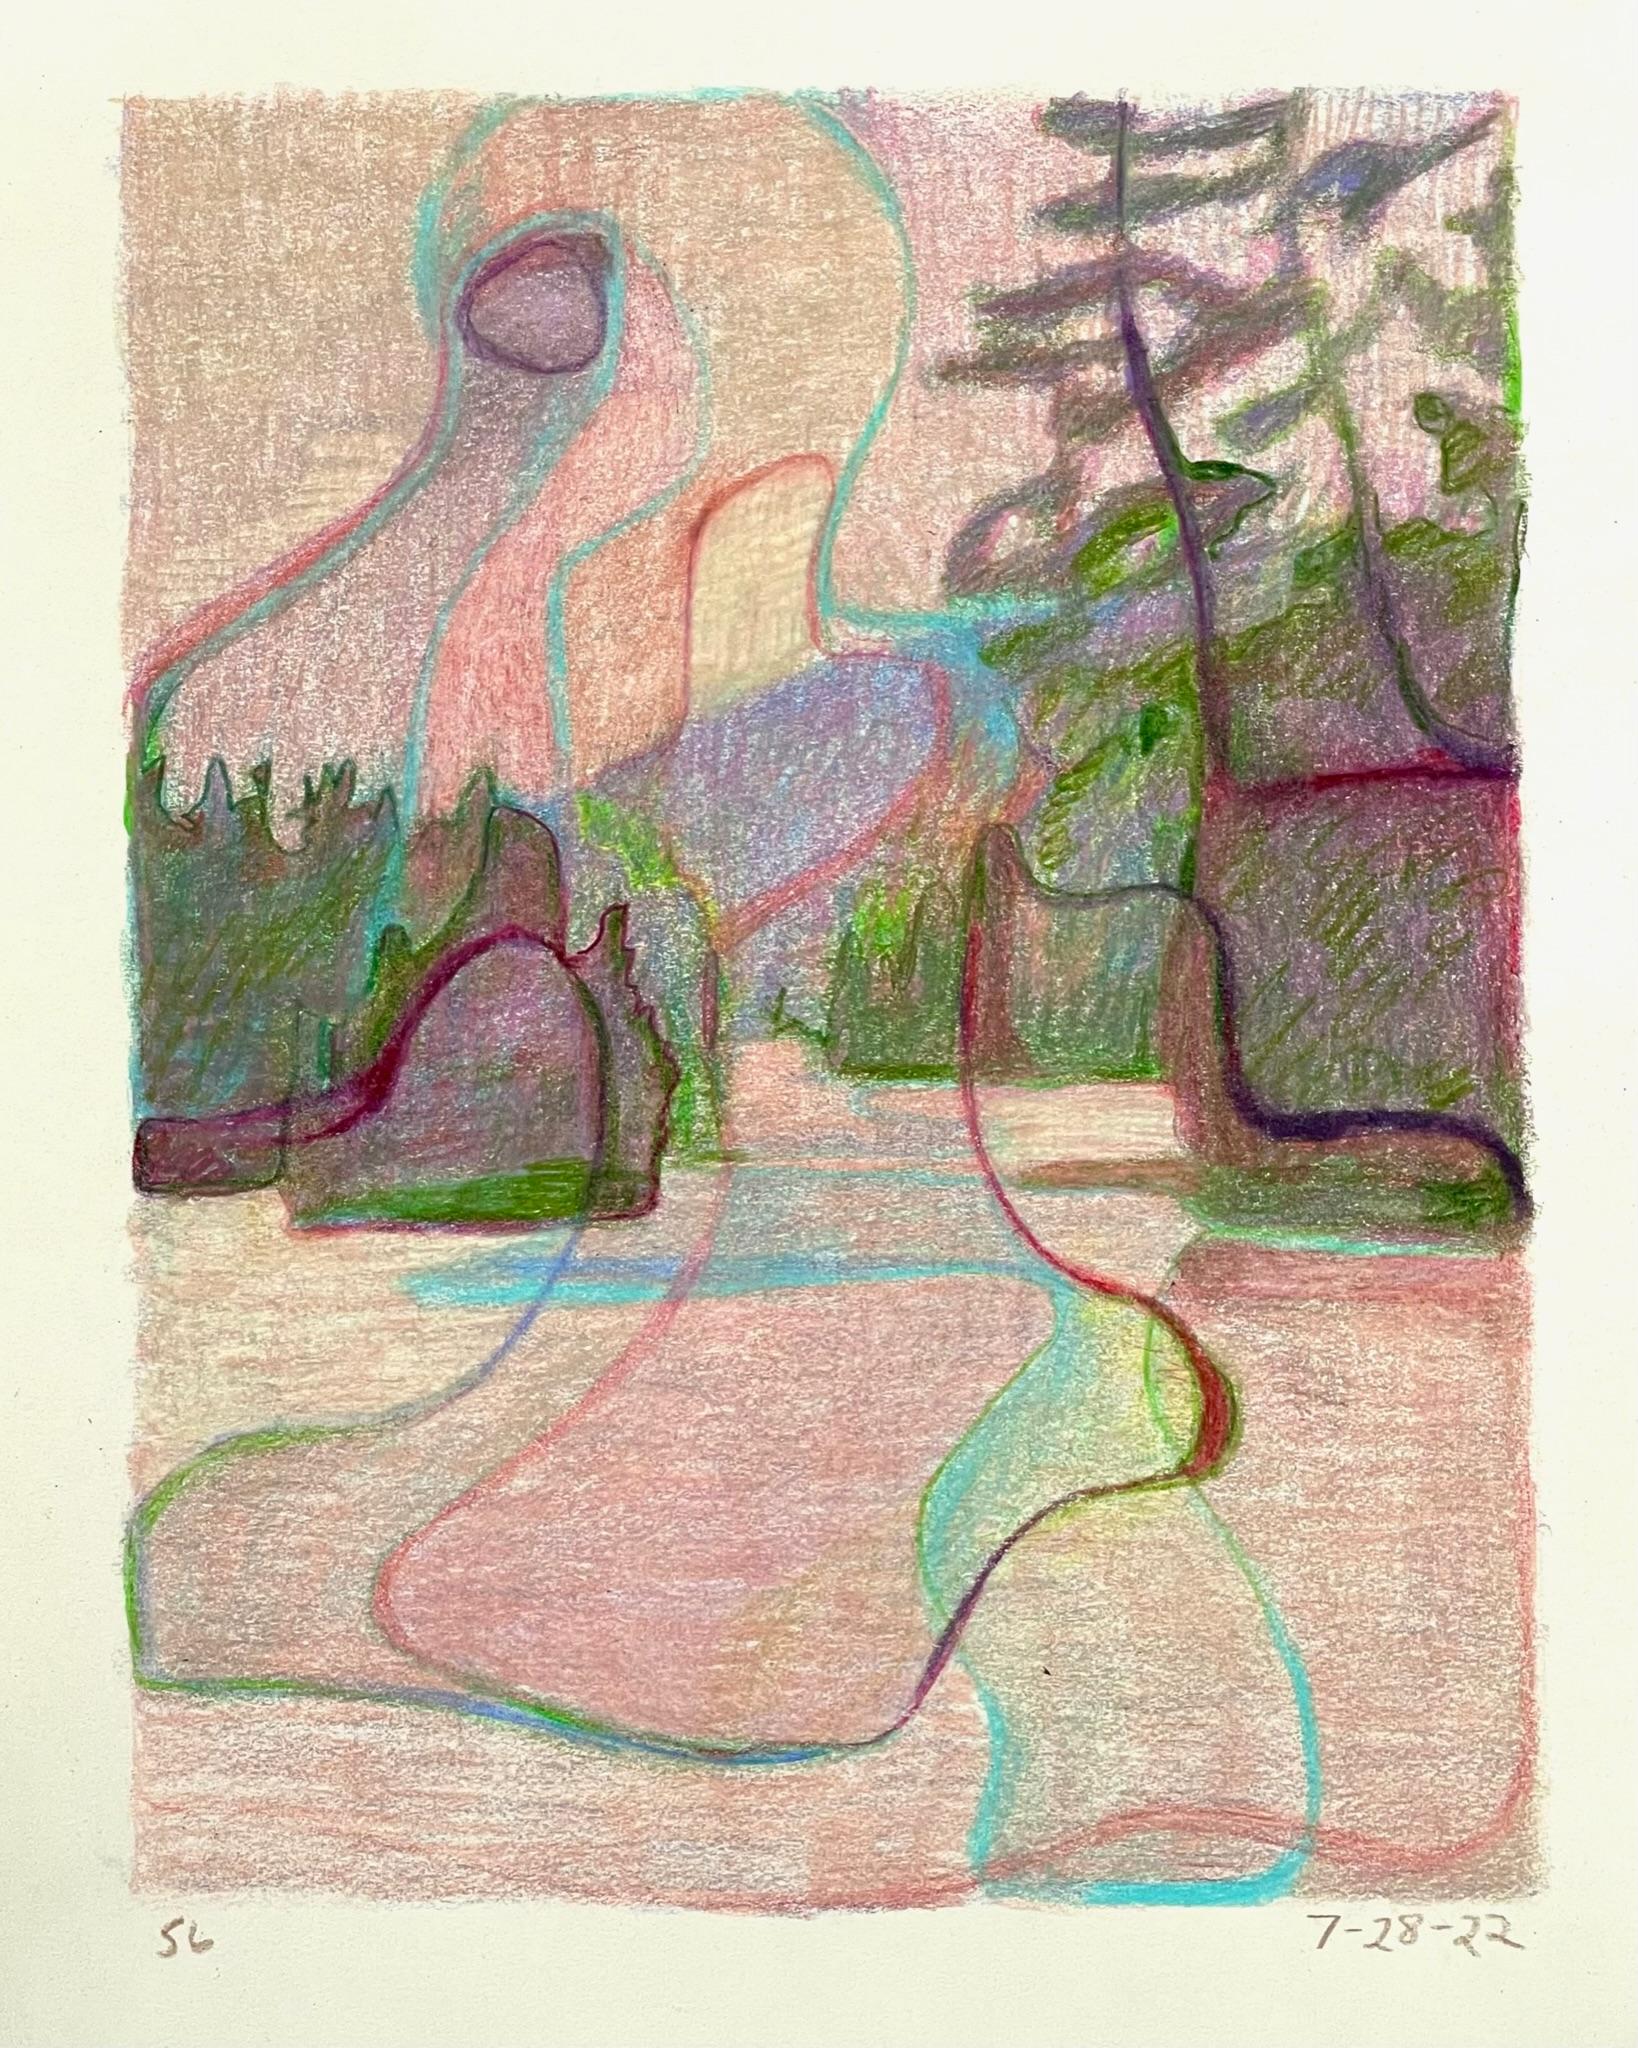 Sandy Litchfield Landscape Art - 7-28-22, Impressionist, abstracted landscape drawing with colored pencil